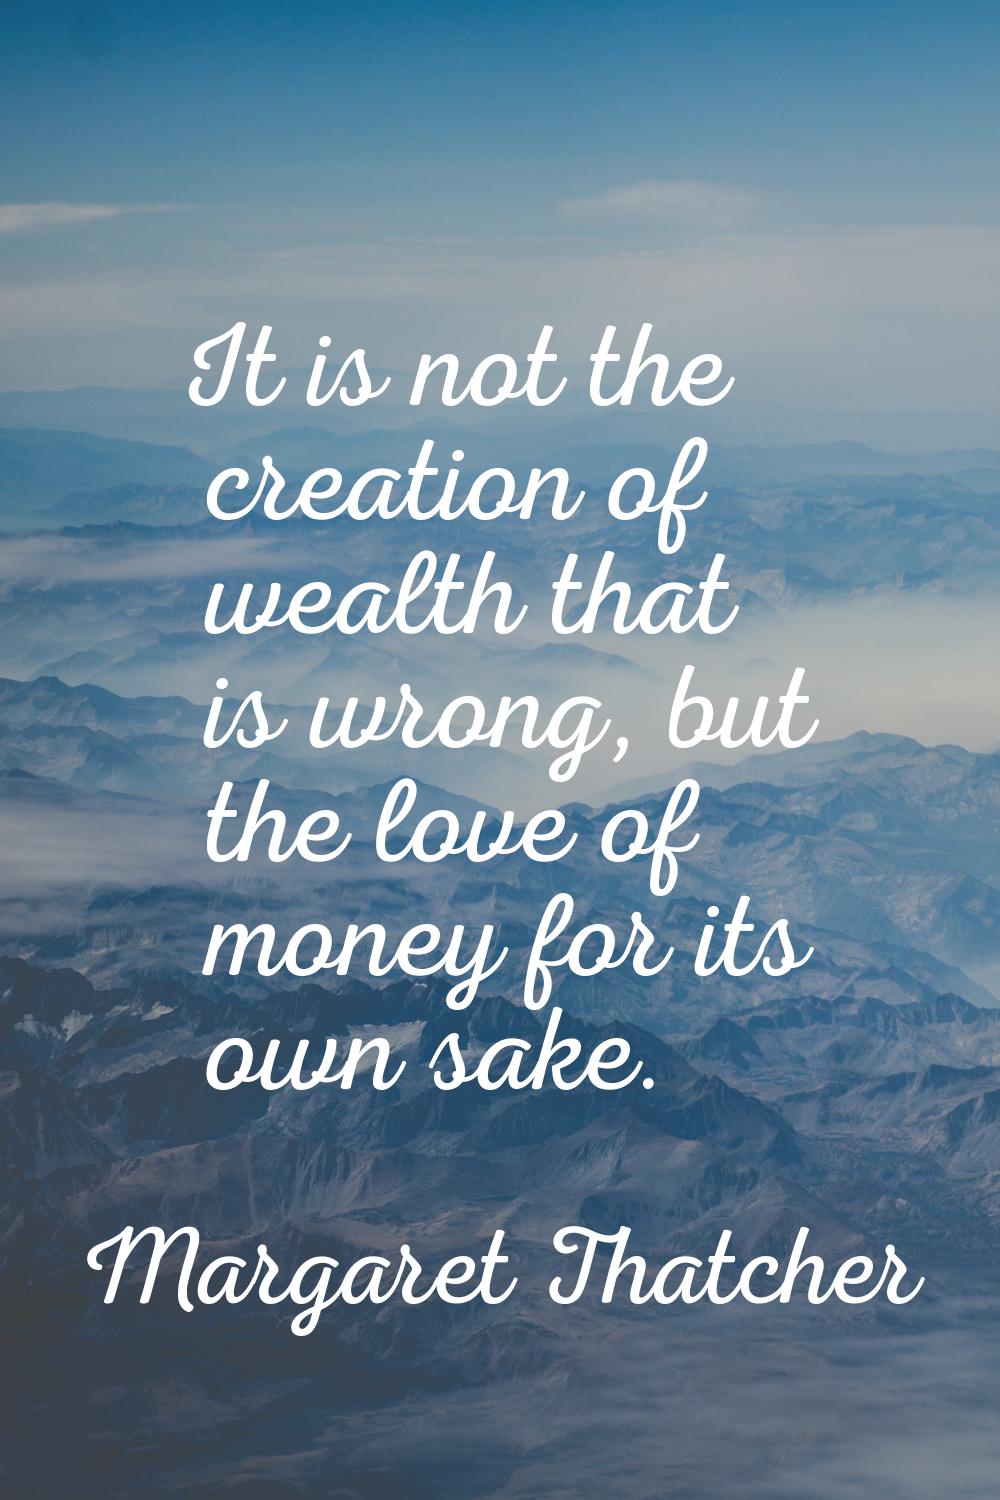 It is not the creation of wealth that is wrong, but the love of money for its own sake.